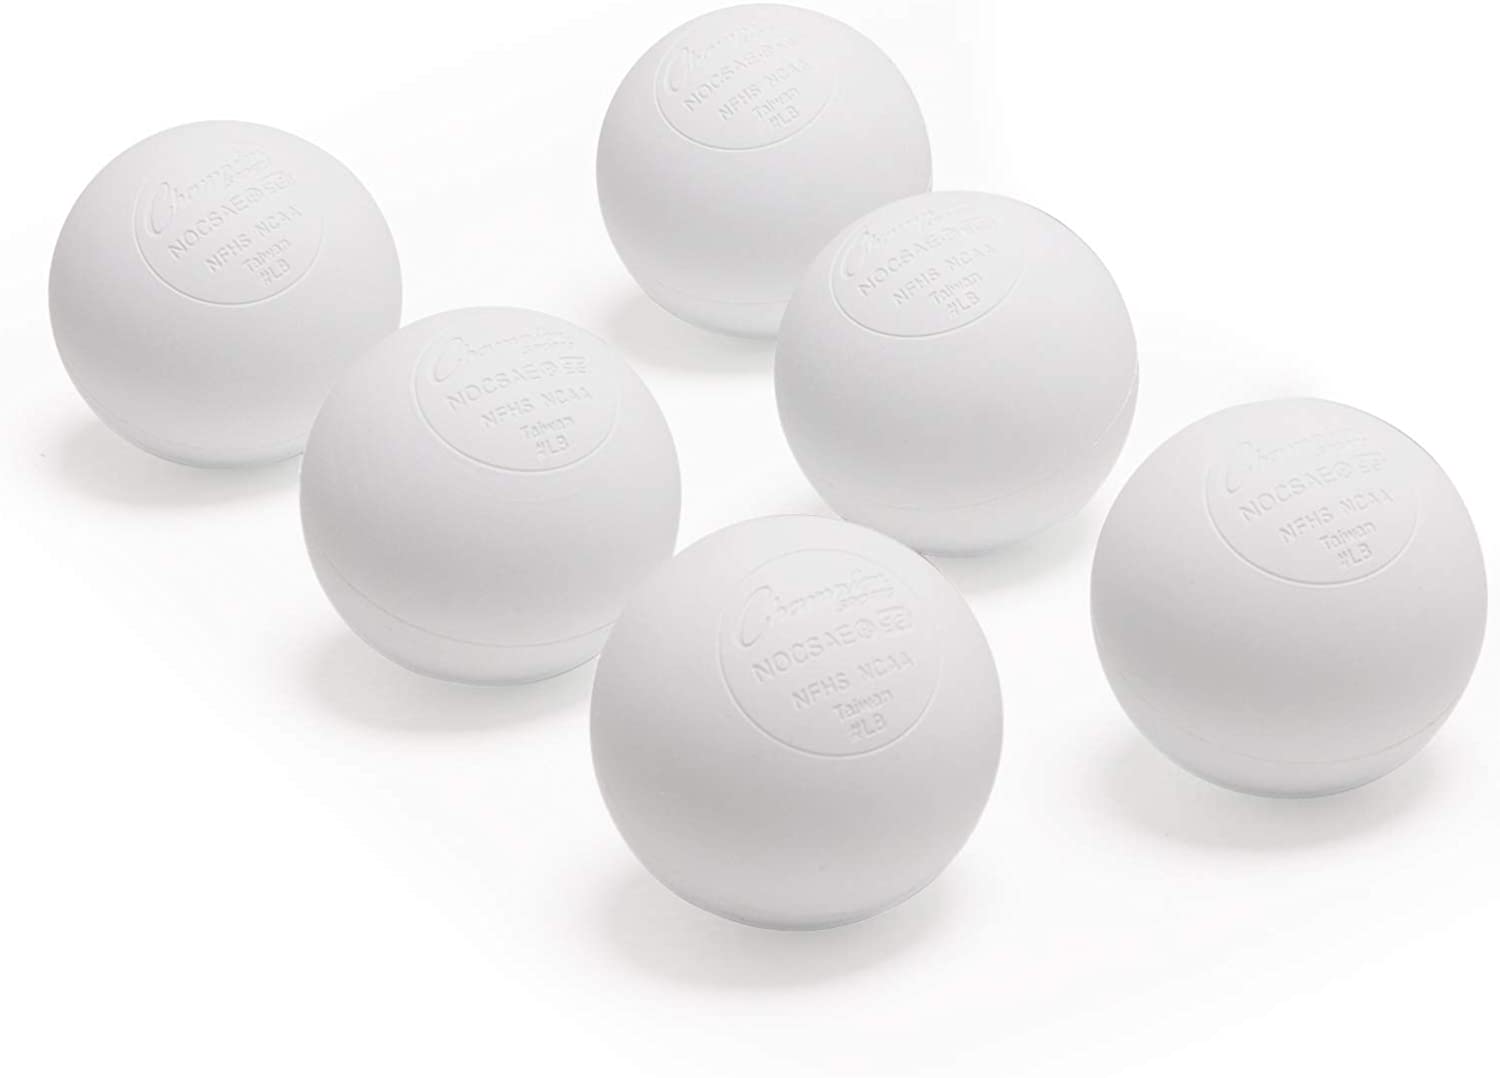 Champion Sports Official Gym Lacrosse Balls, 12-Pack